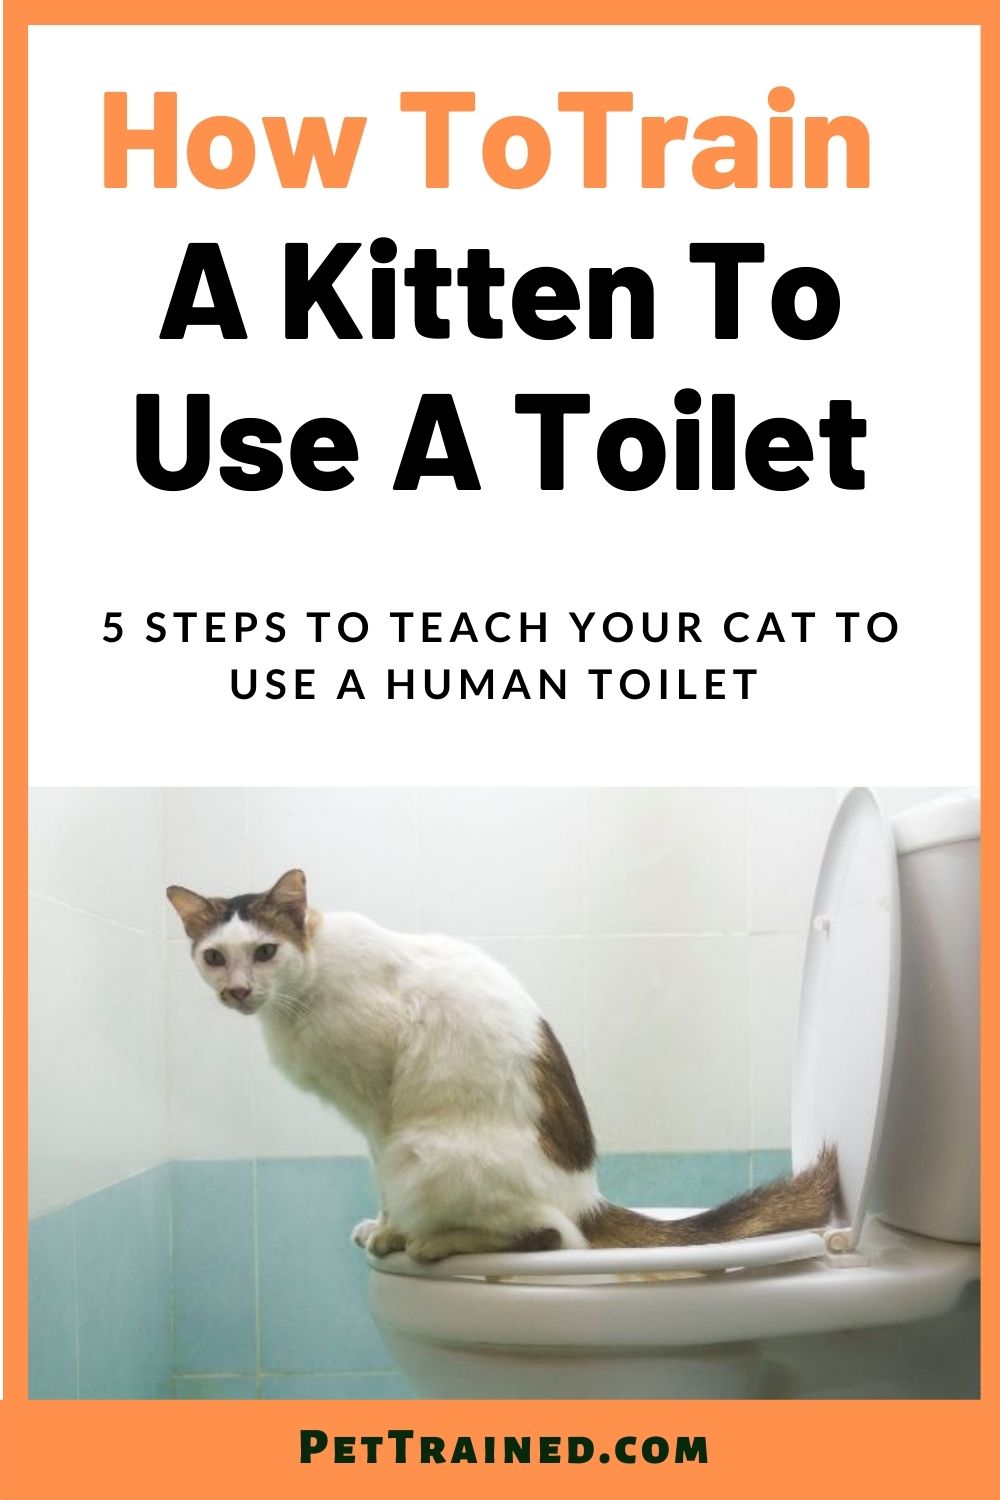 How to train a cat to use a human toilet